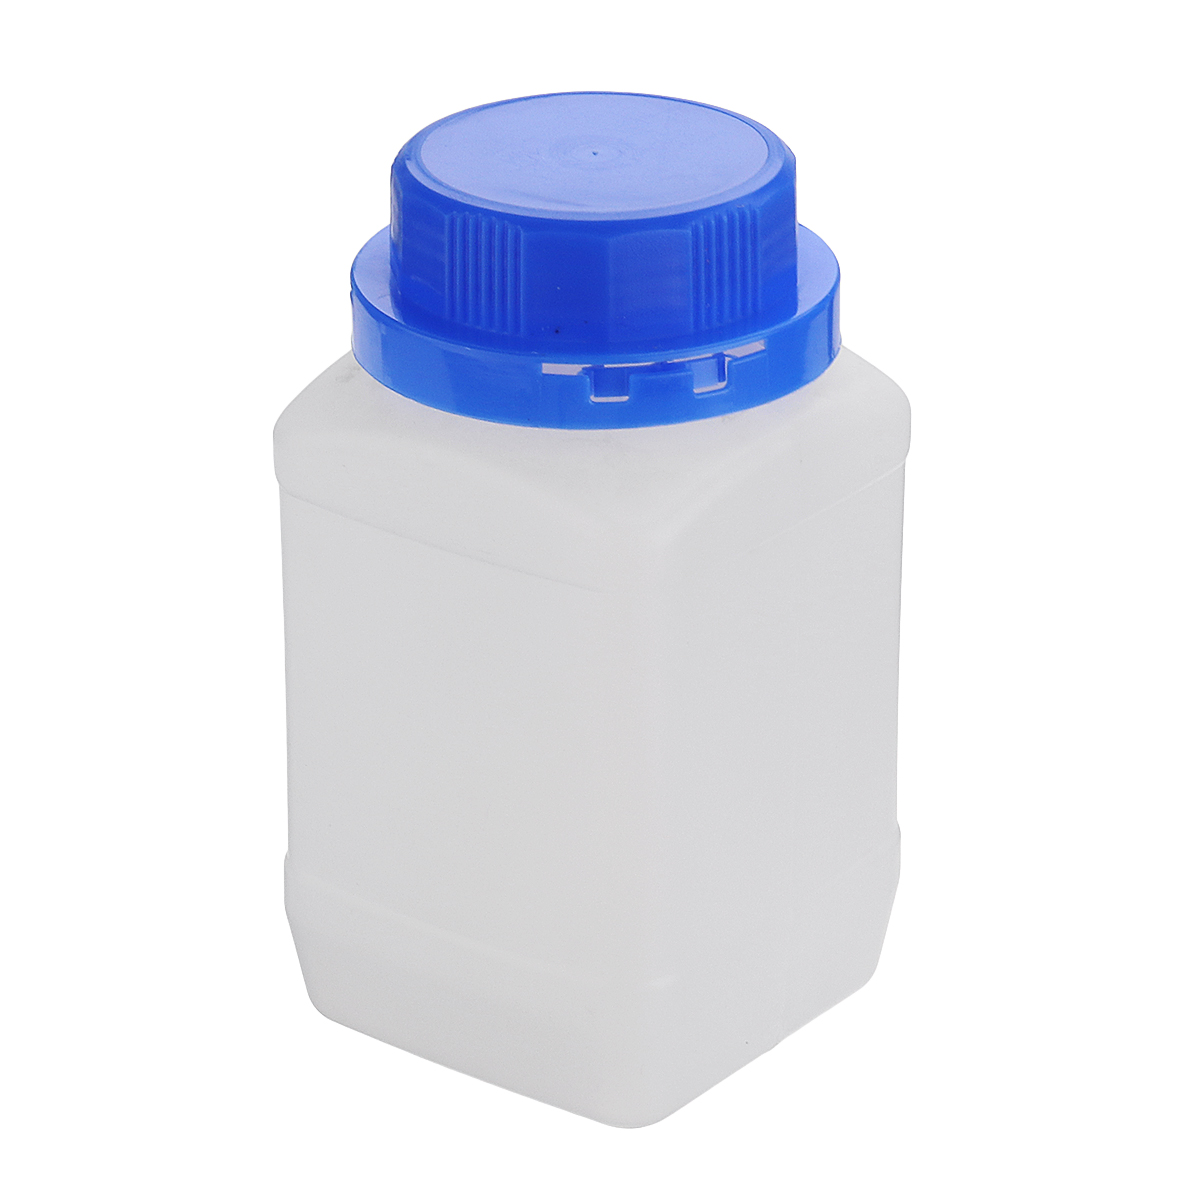 

1000ml Plastic Square Sample Sealing Bottle Wide Mouth Reagent Bottles with Blue Screw Cap Laboratory Experiment